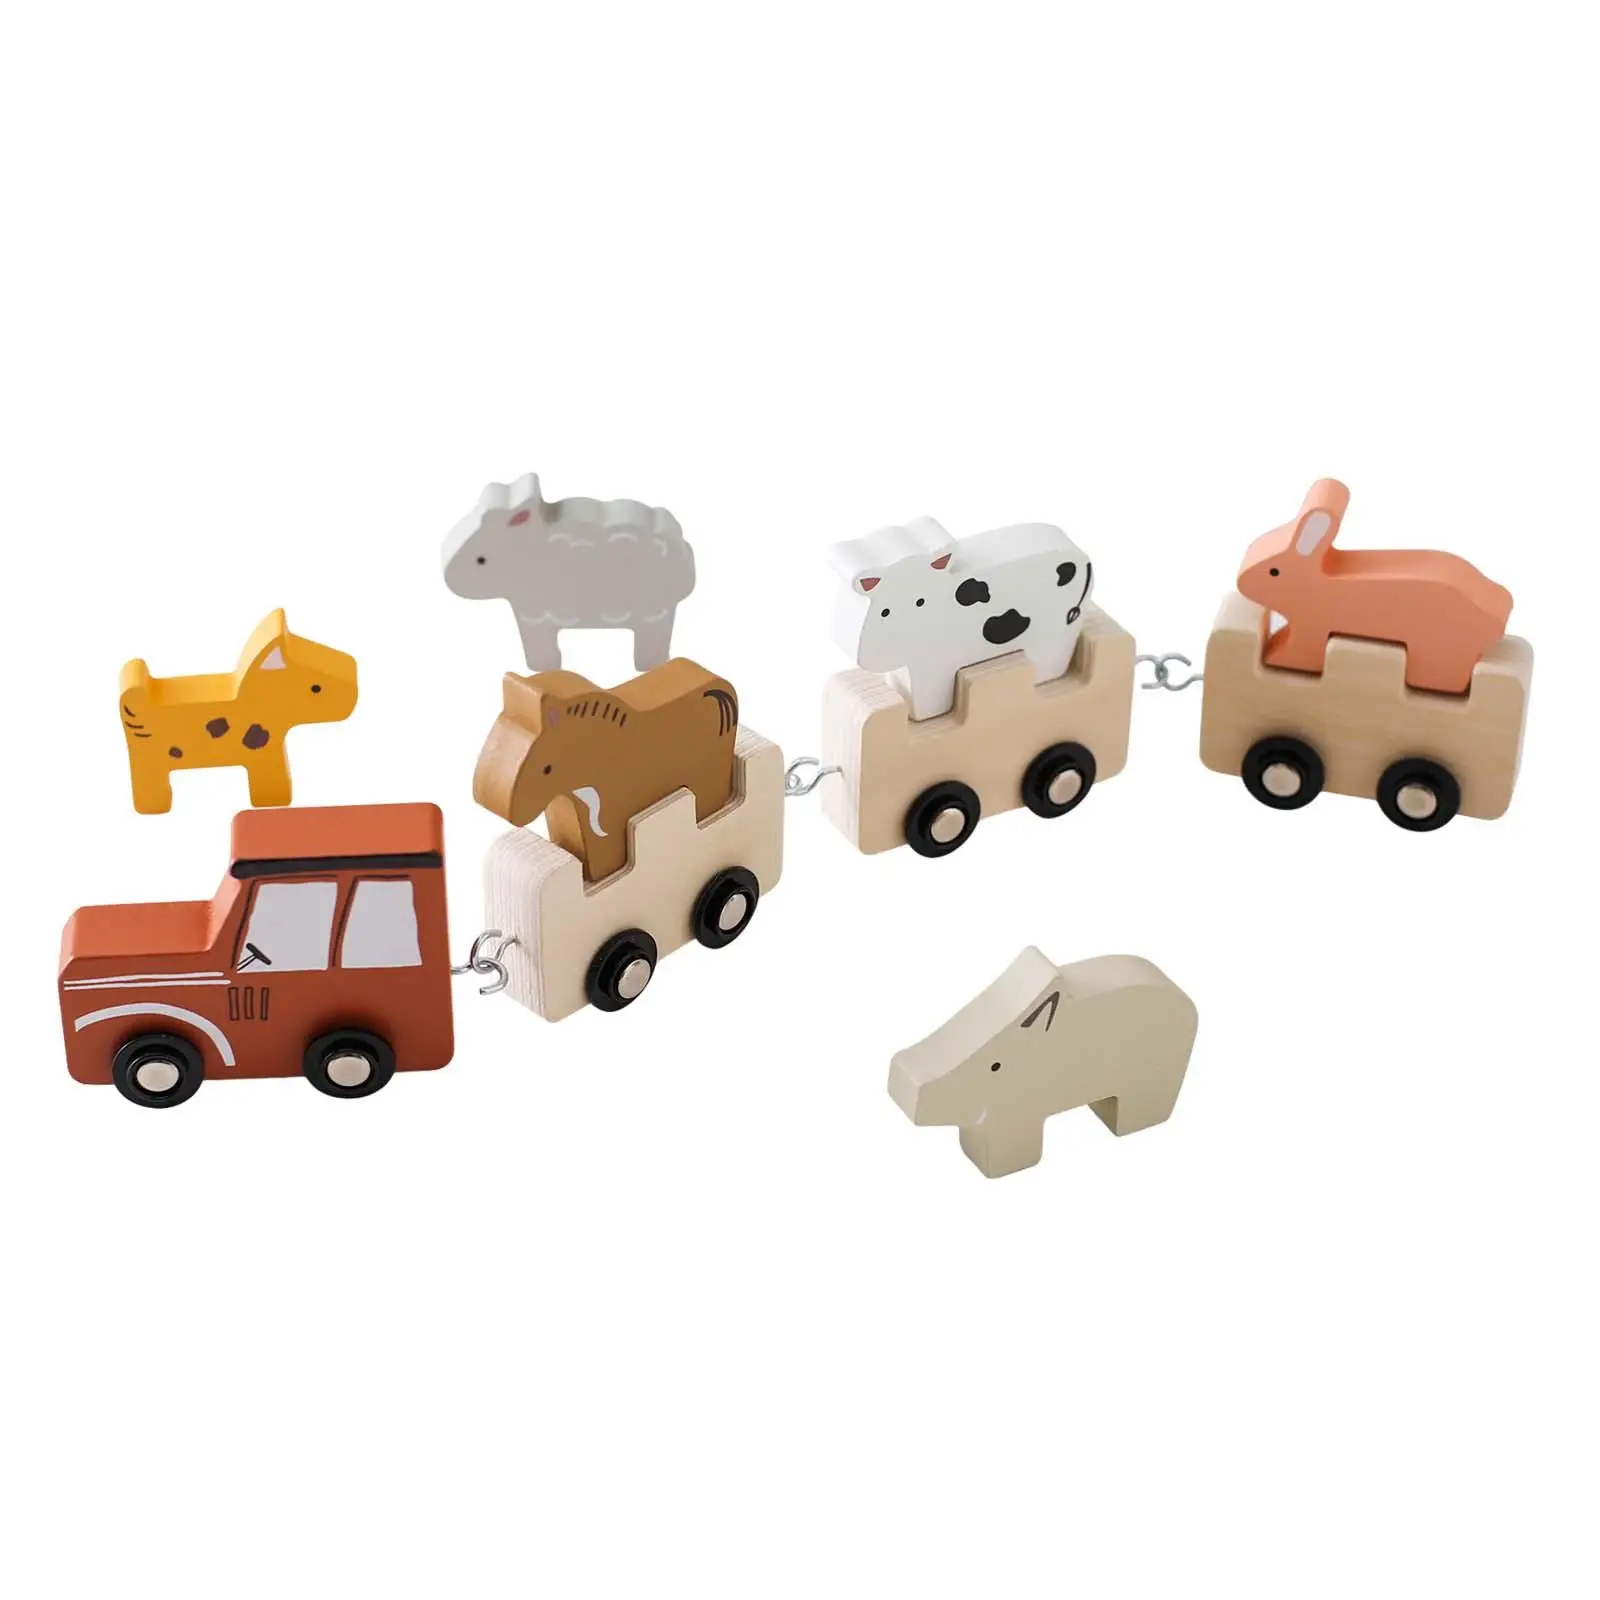 Animal Wooden Train Toy Stacking Toy Removable Animal Figures Animal Farm Train Montessori Toy for Kids 2 3 Year Old Boy